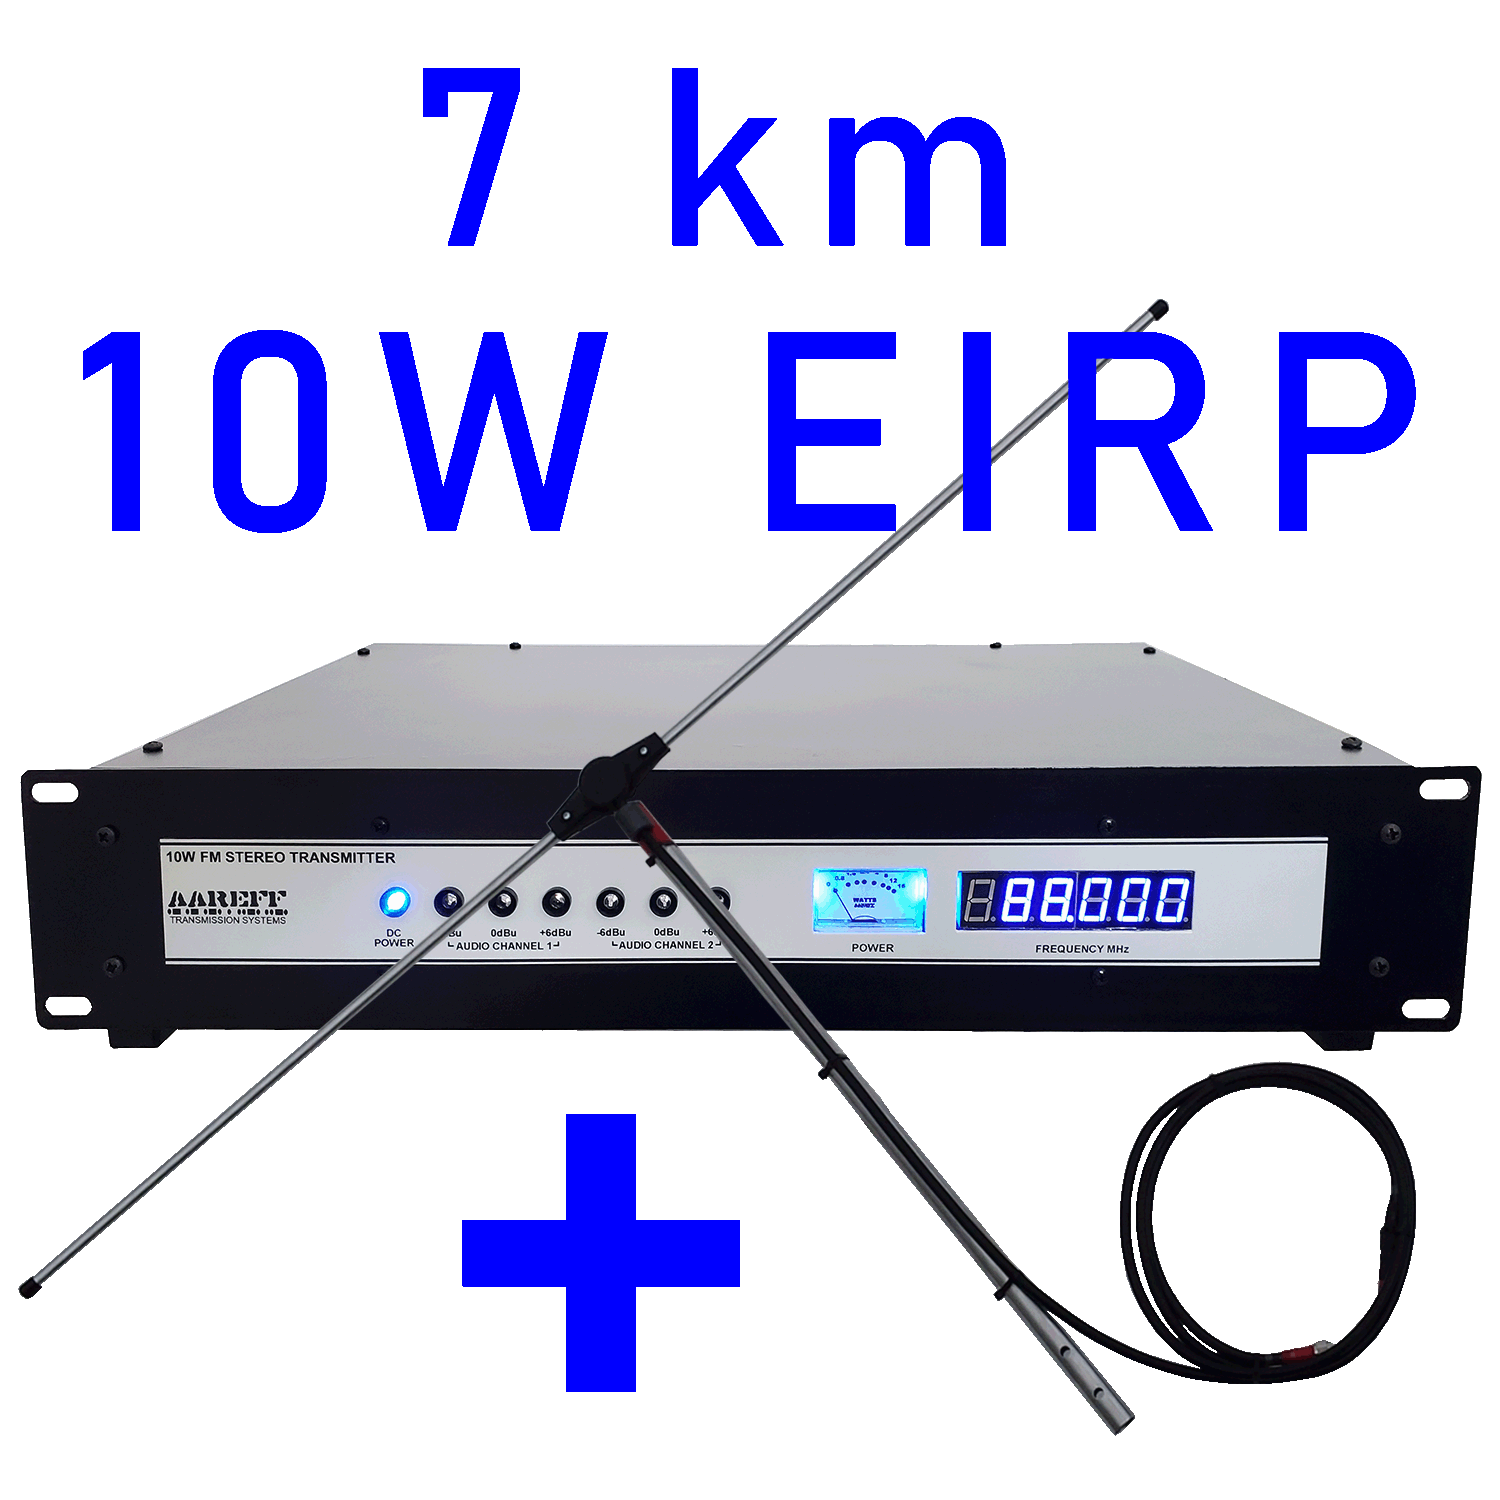 10W EIRP 19 inch professional equipment rack with FM transmitter and RF amplifier